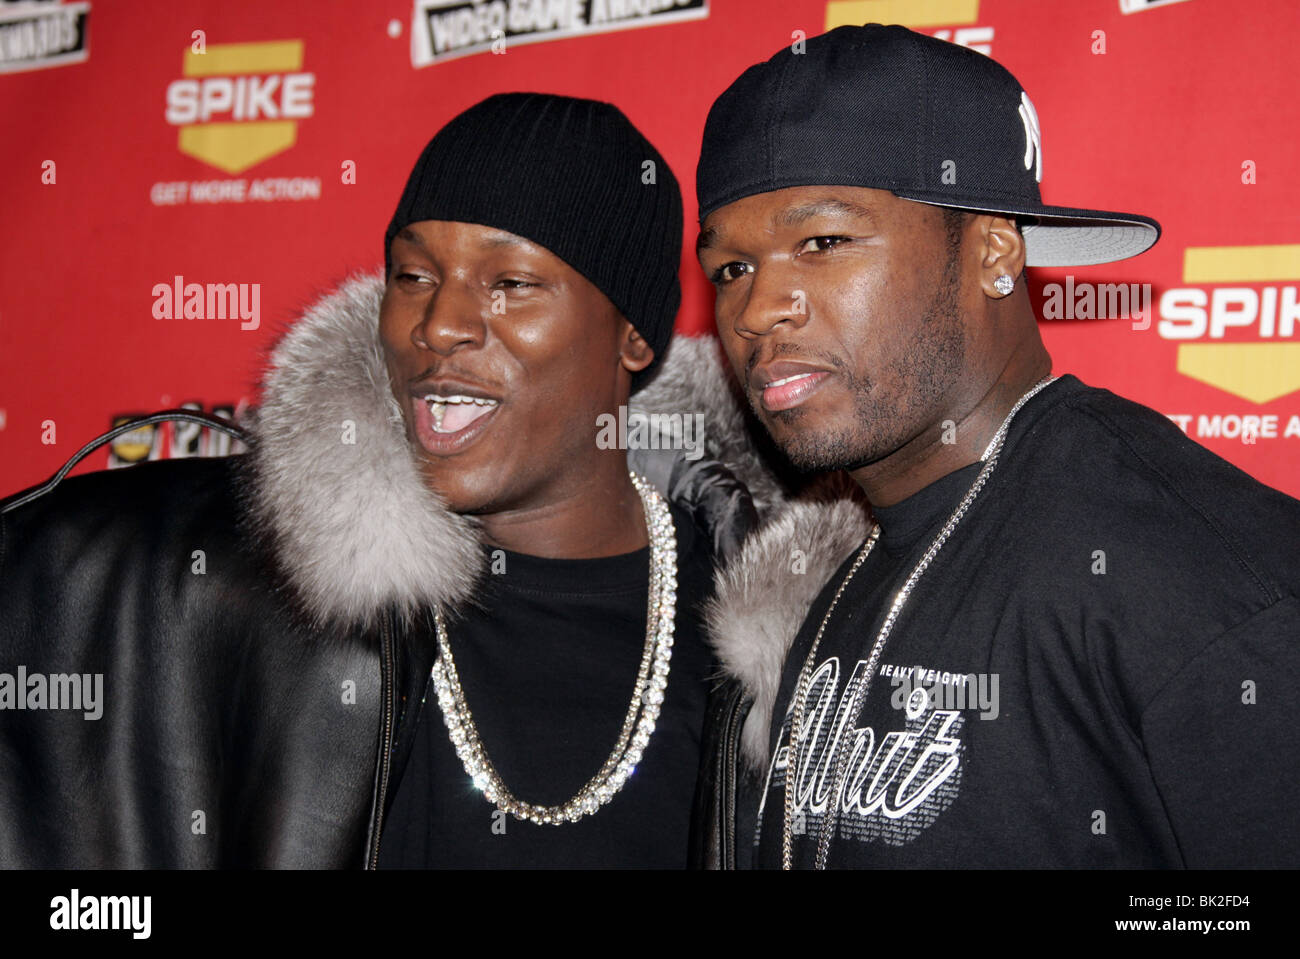 TYRESE GIBSON & 50 CENT AKA CURTIS JACKSON SPIKE TV 2006 VIDEO GAME ...